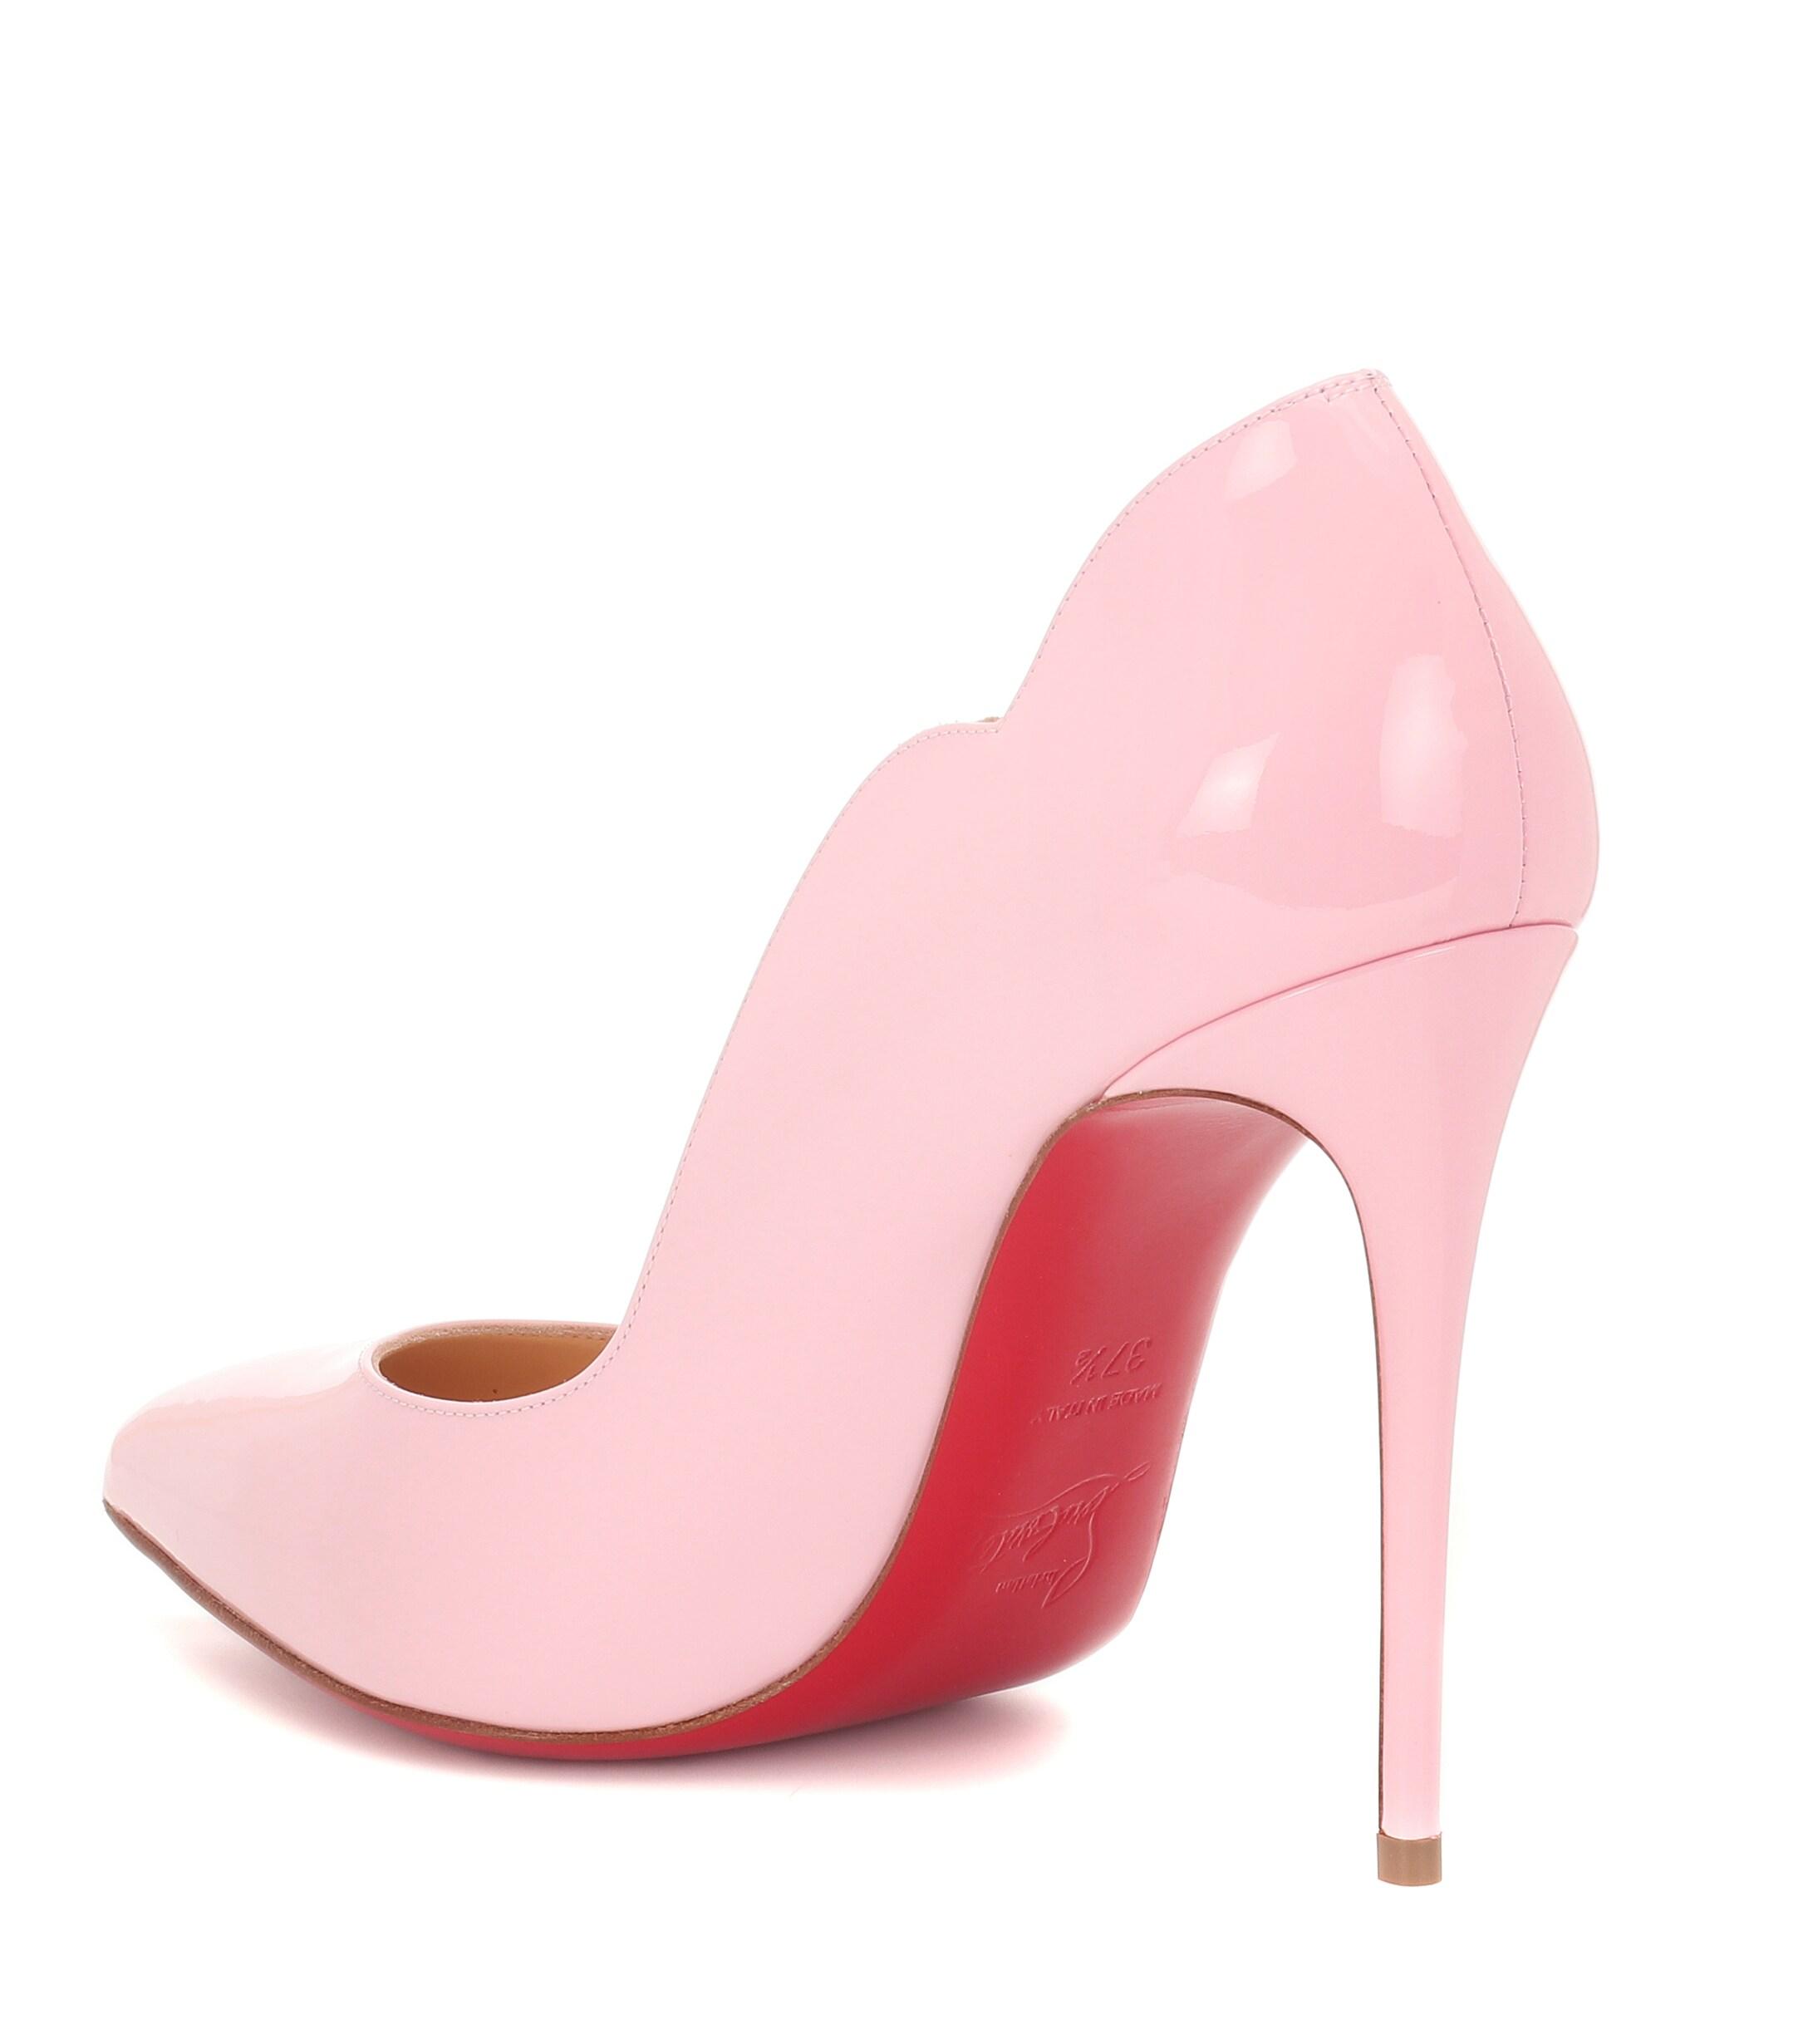 Hot Chick 100 patent psychic pink pumps